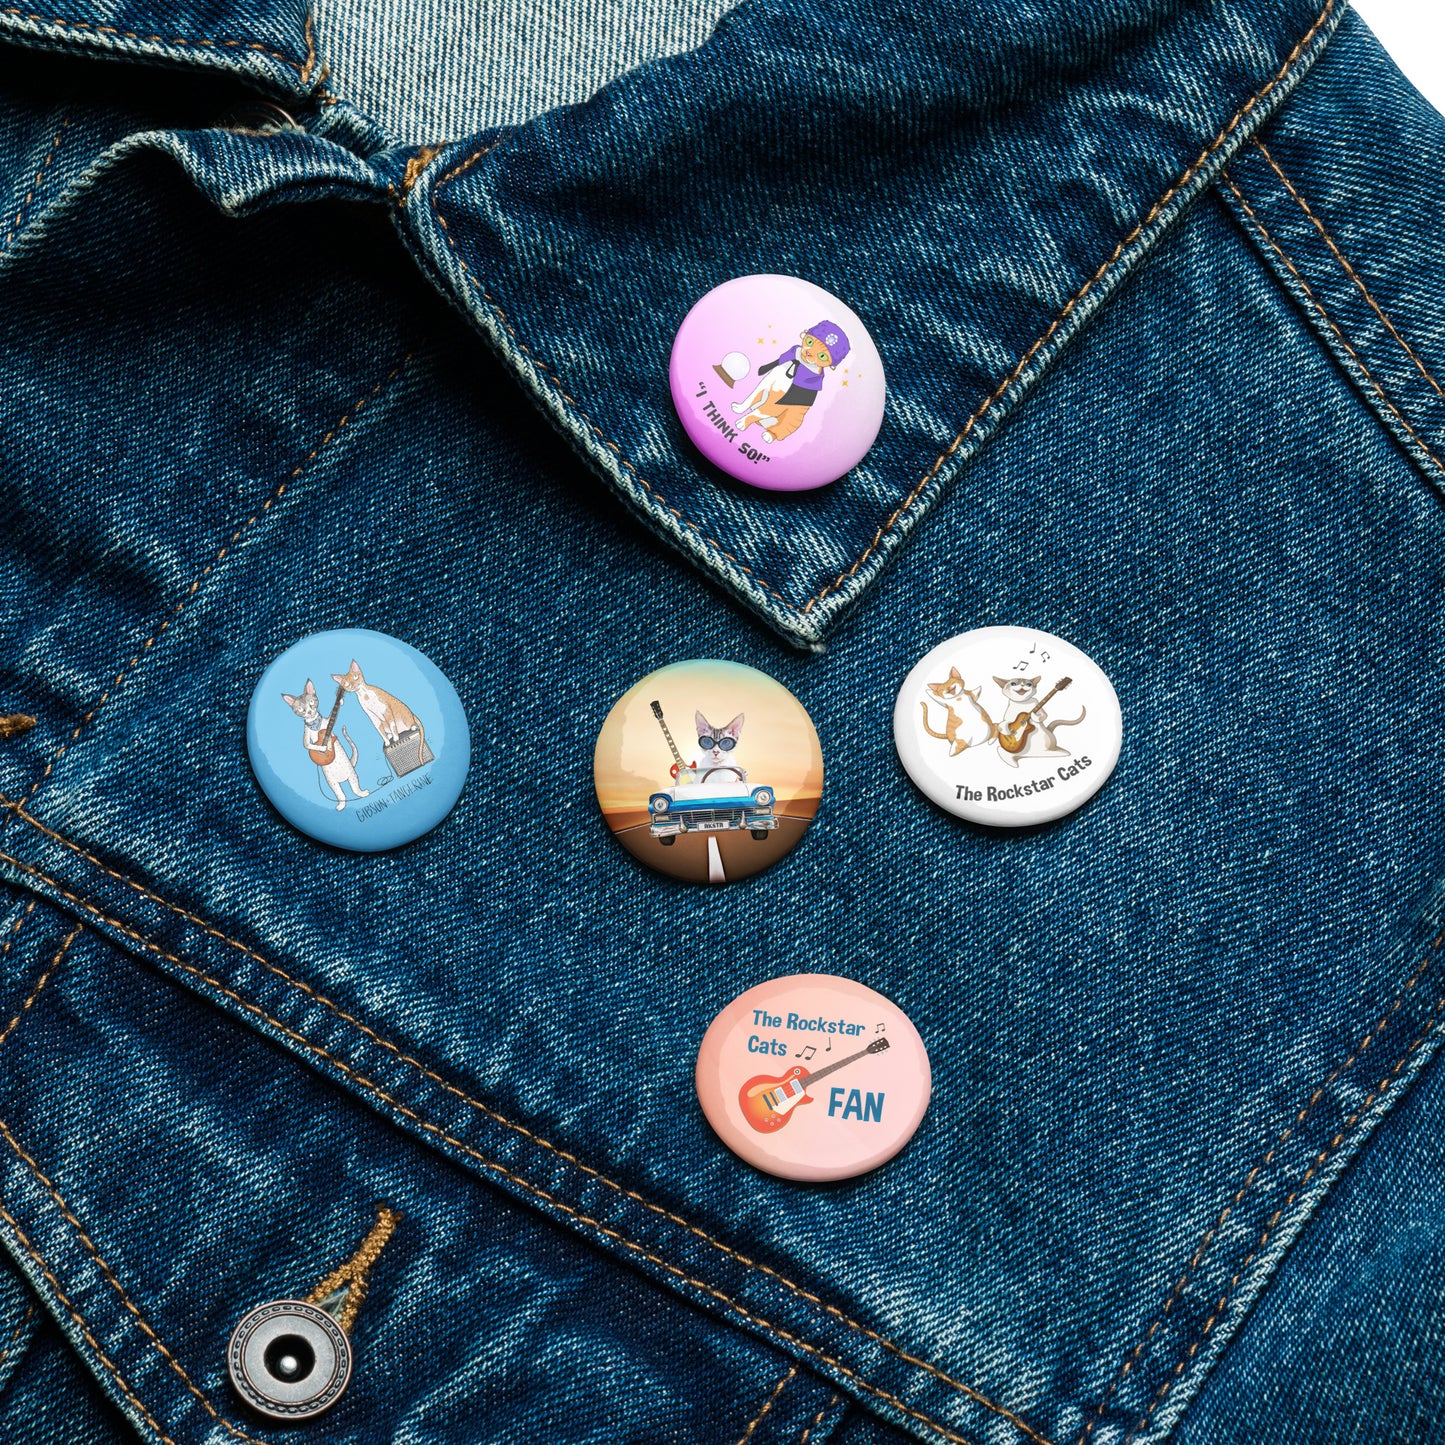 Set of pin buttons featuring The Rockstar Cat